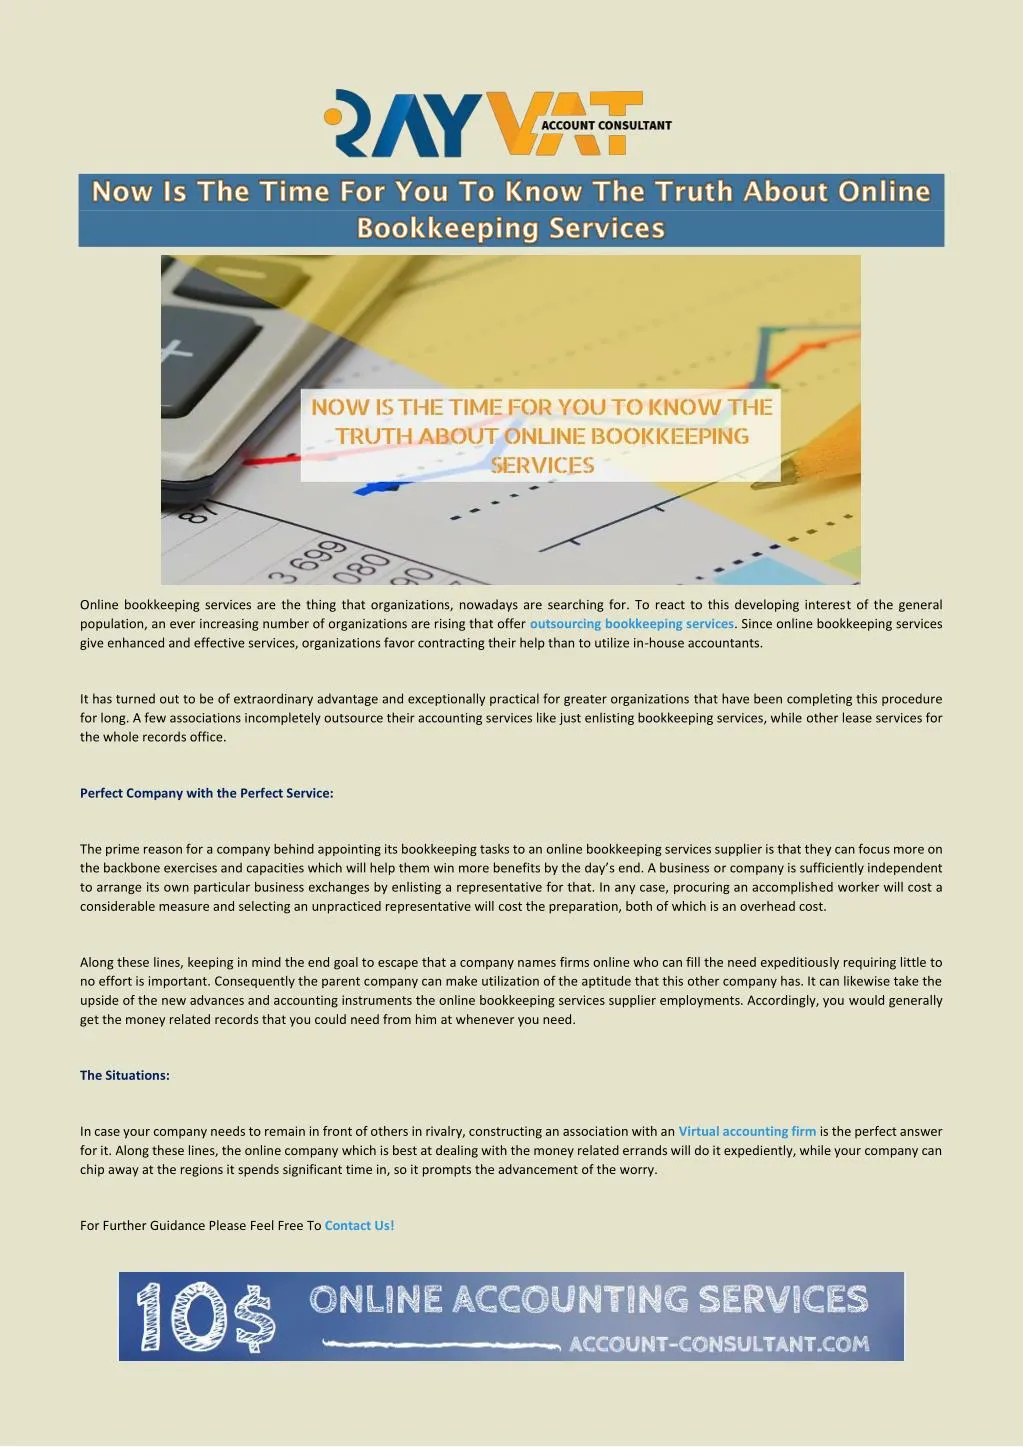 online bookkeeping services are the thing that